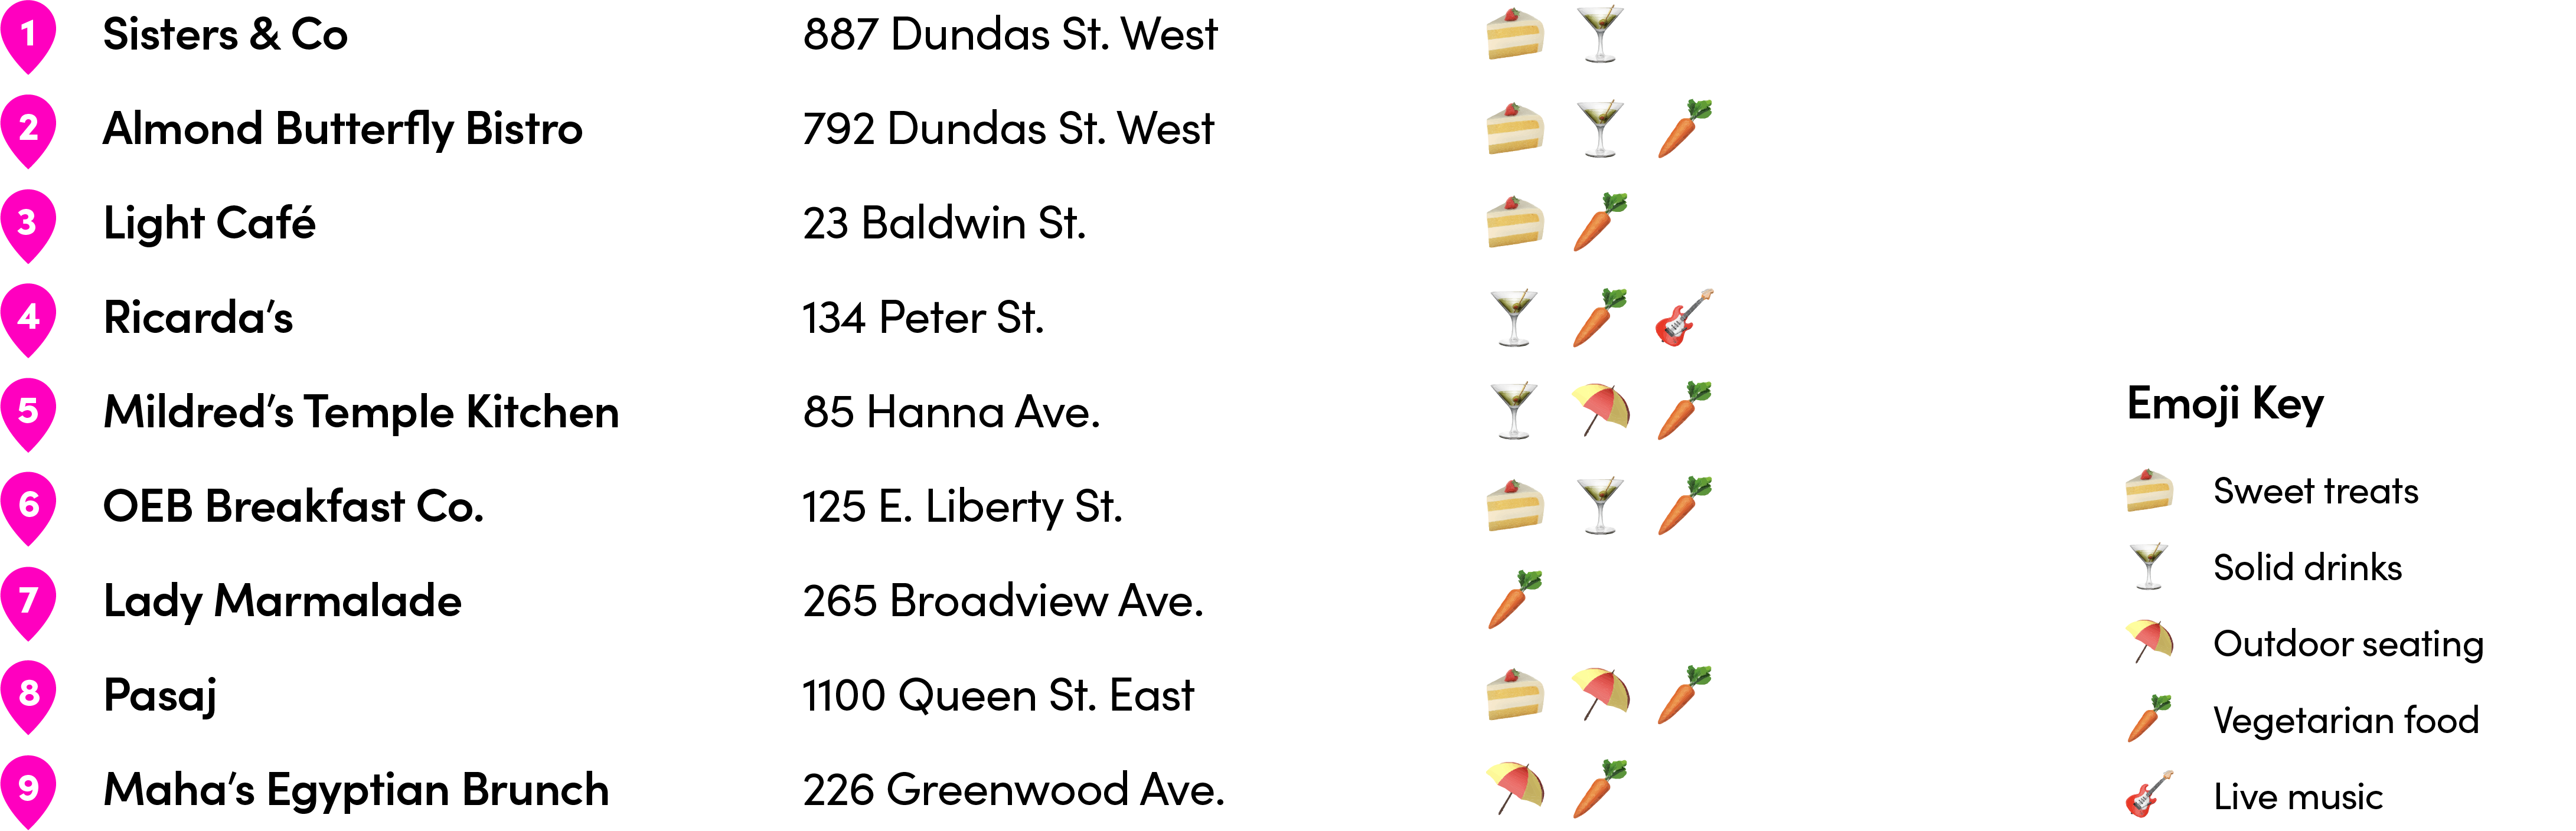 Lady Marmalade
265 Broadview Ave.
OEB Breakfast Co.
125 E. Liberty St.
Pasaj
1100 Queen St. East
Mildred’s Temple Kitchen
85 Hanna Ave.
Almond Butterfly Bistro
792 Dundas St. West
Sisters & Co
887 Dundas St. West
Maha’s Egyptian Brunch
226 Greenwood Ave.
Light Café
23 Baldwin St. 
Ricarda’s
134 Peter St.